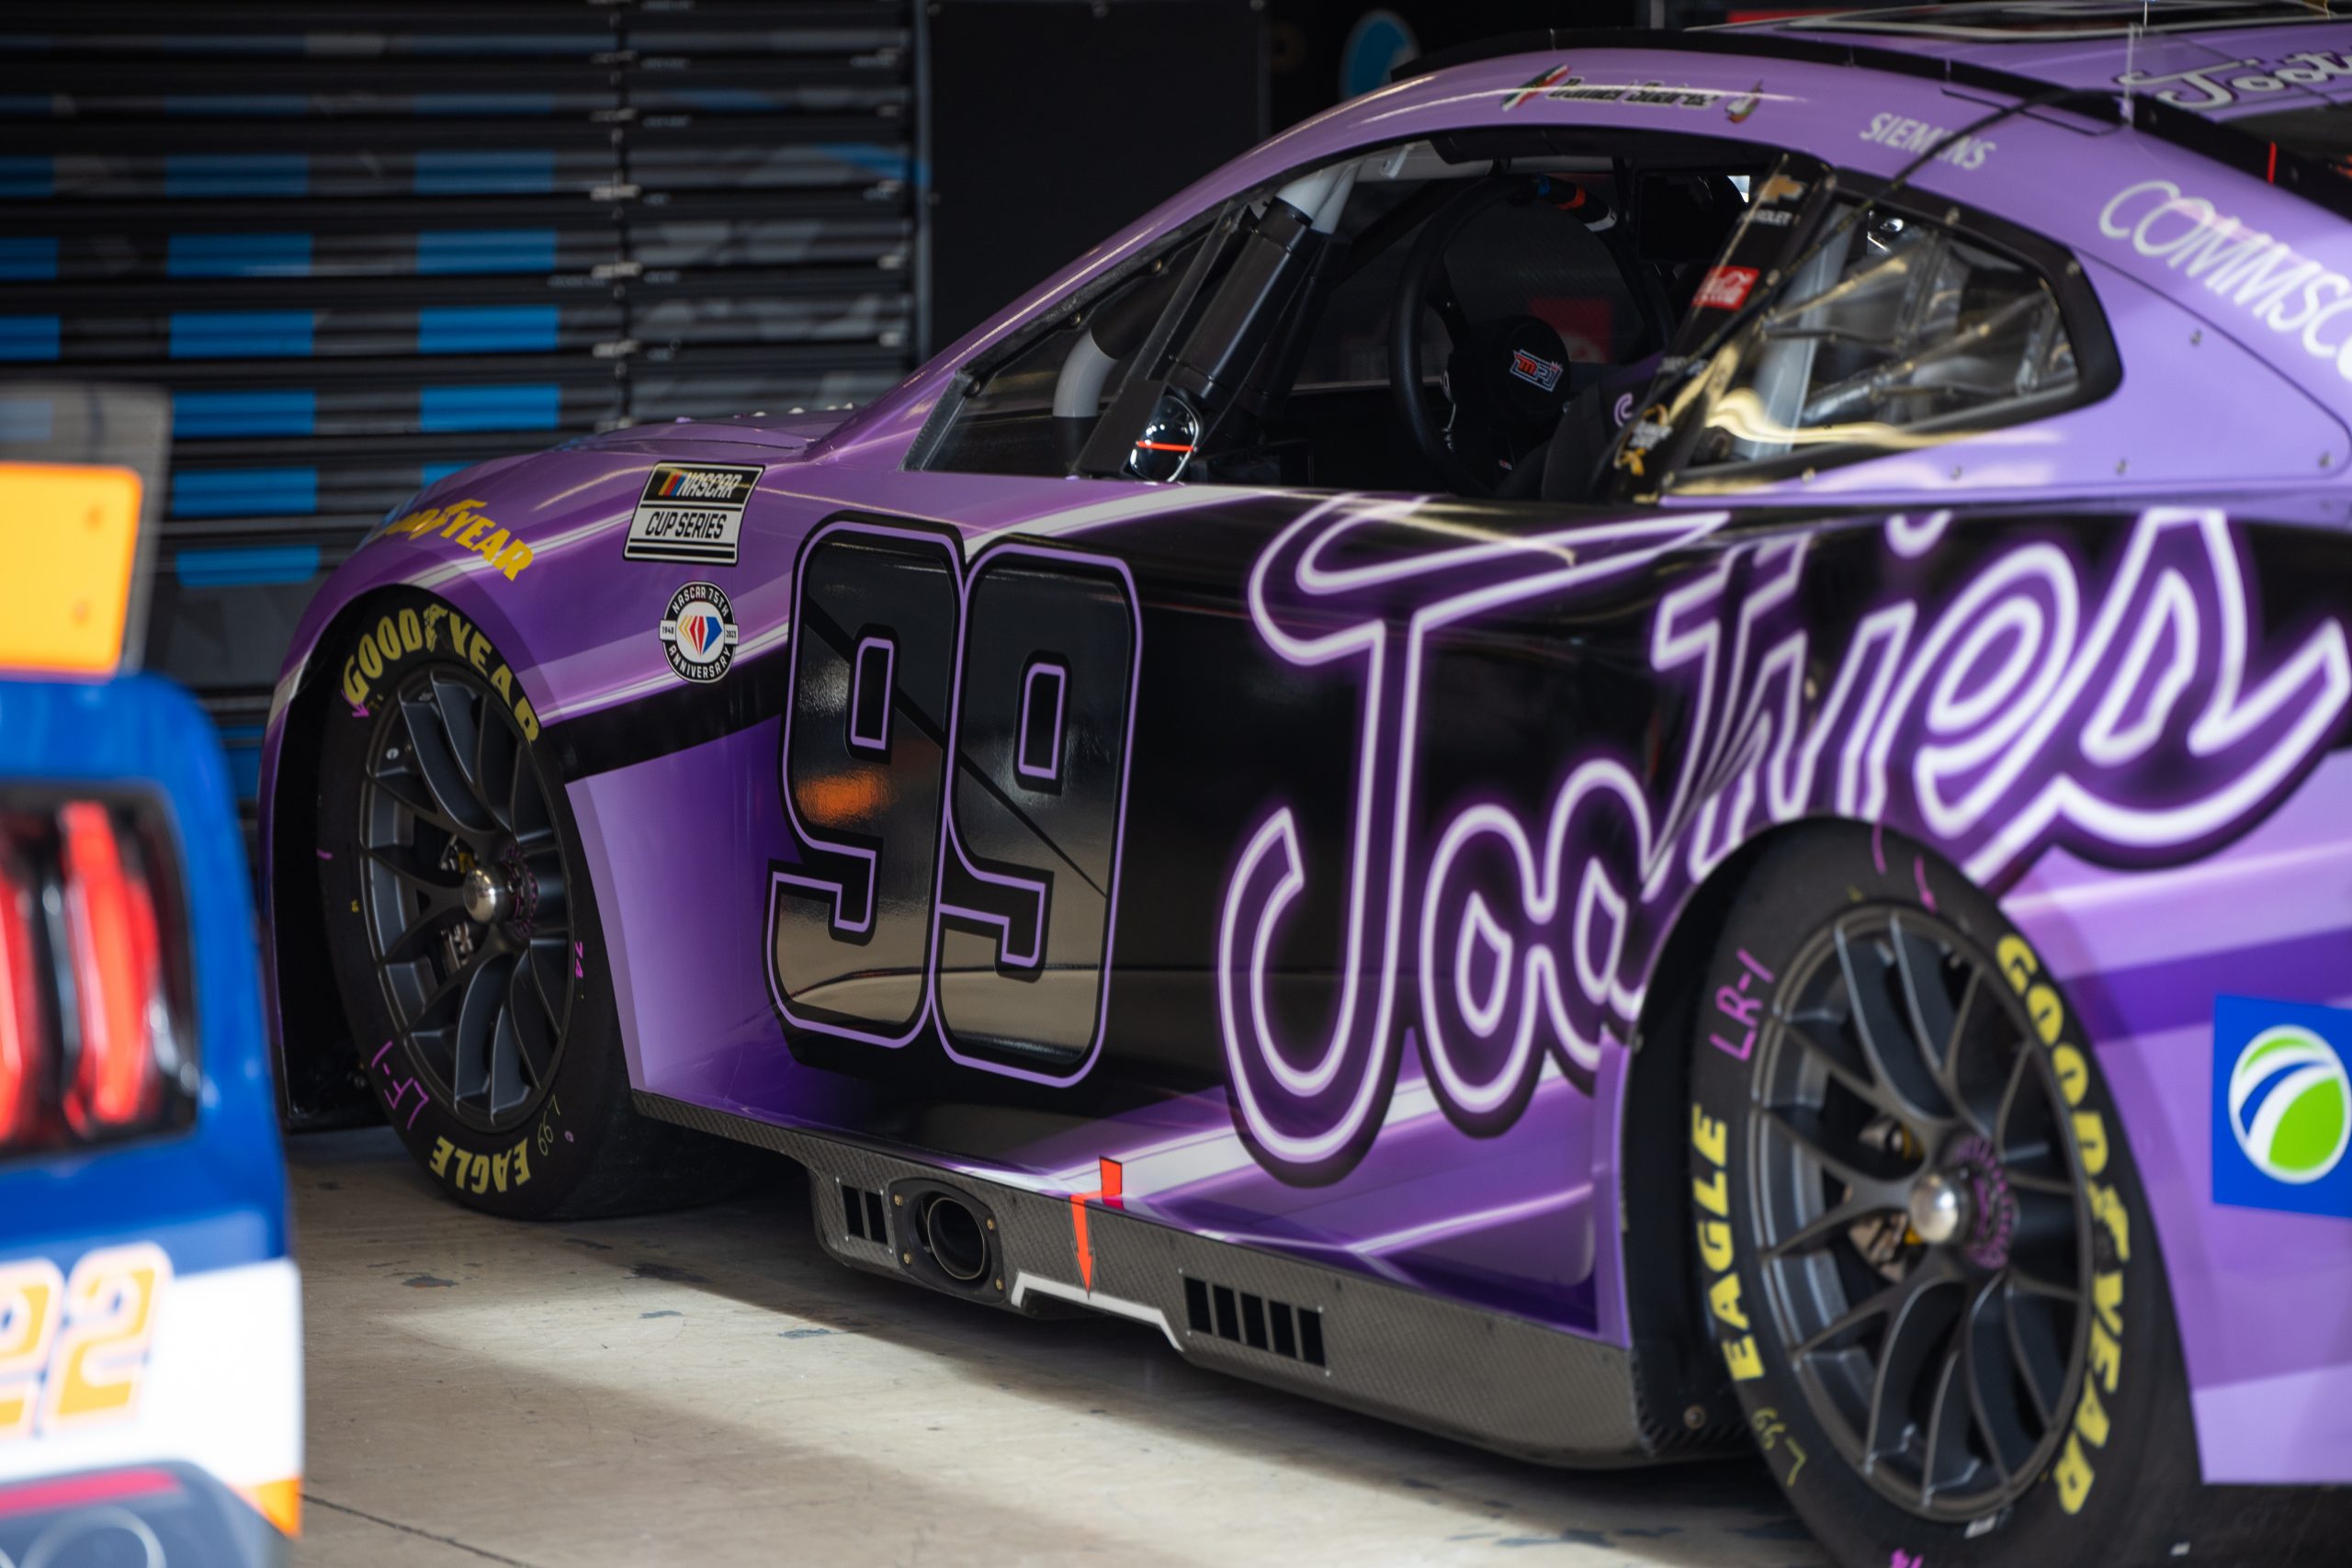 Daniel Suárez's No. 99 ride may be a favorite of FOX NASCAR's Clint Bowyer in terms of its livery for Sunday's Ambetter Health 400 at Atlanta. (Photo: Riley Thompson | The Podium Finish)